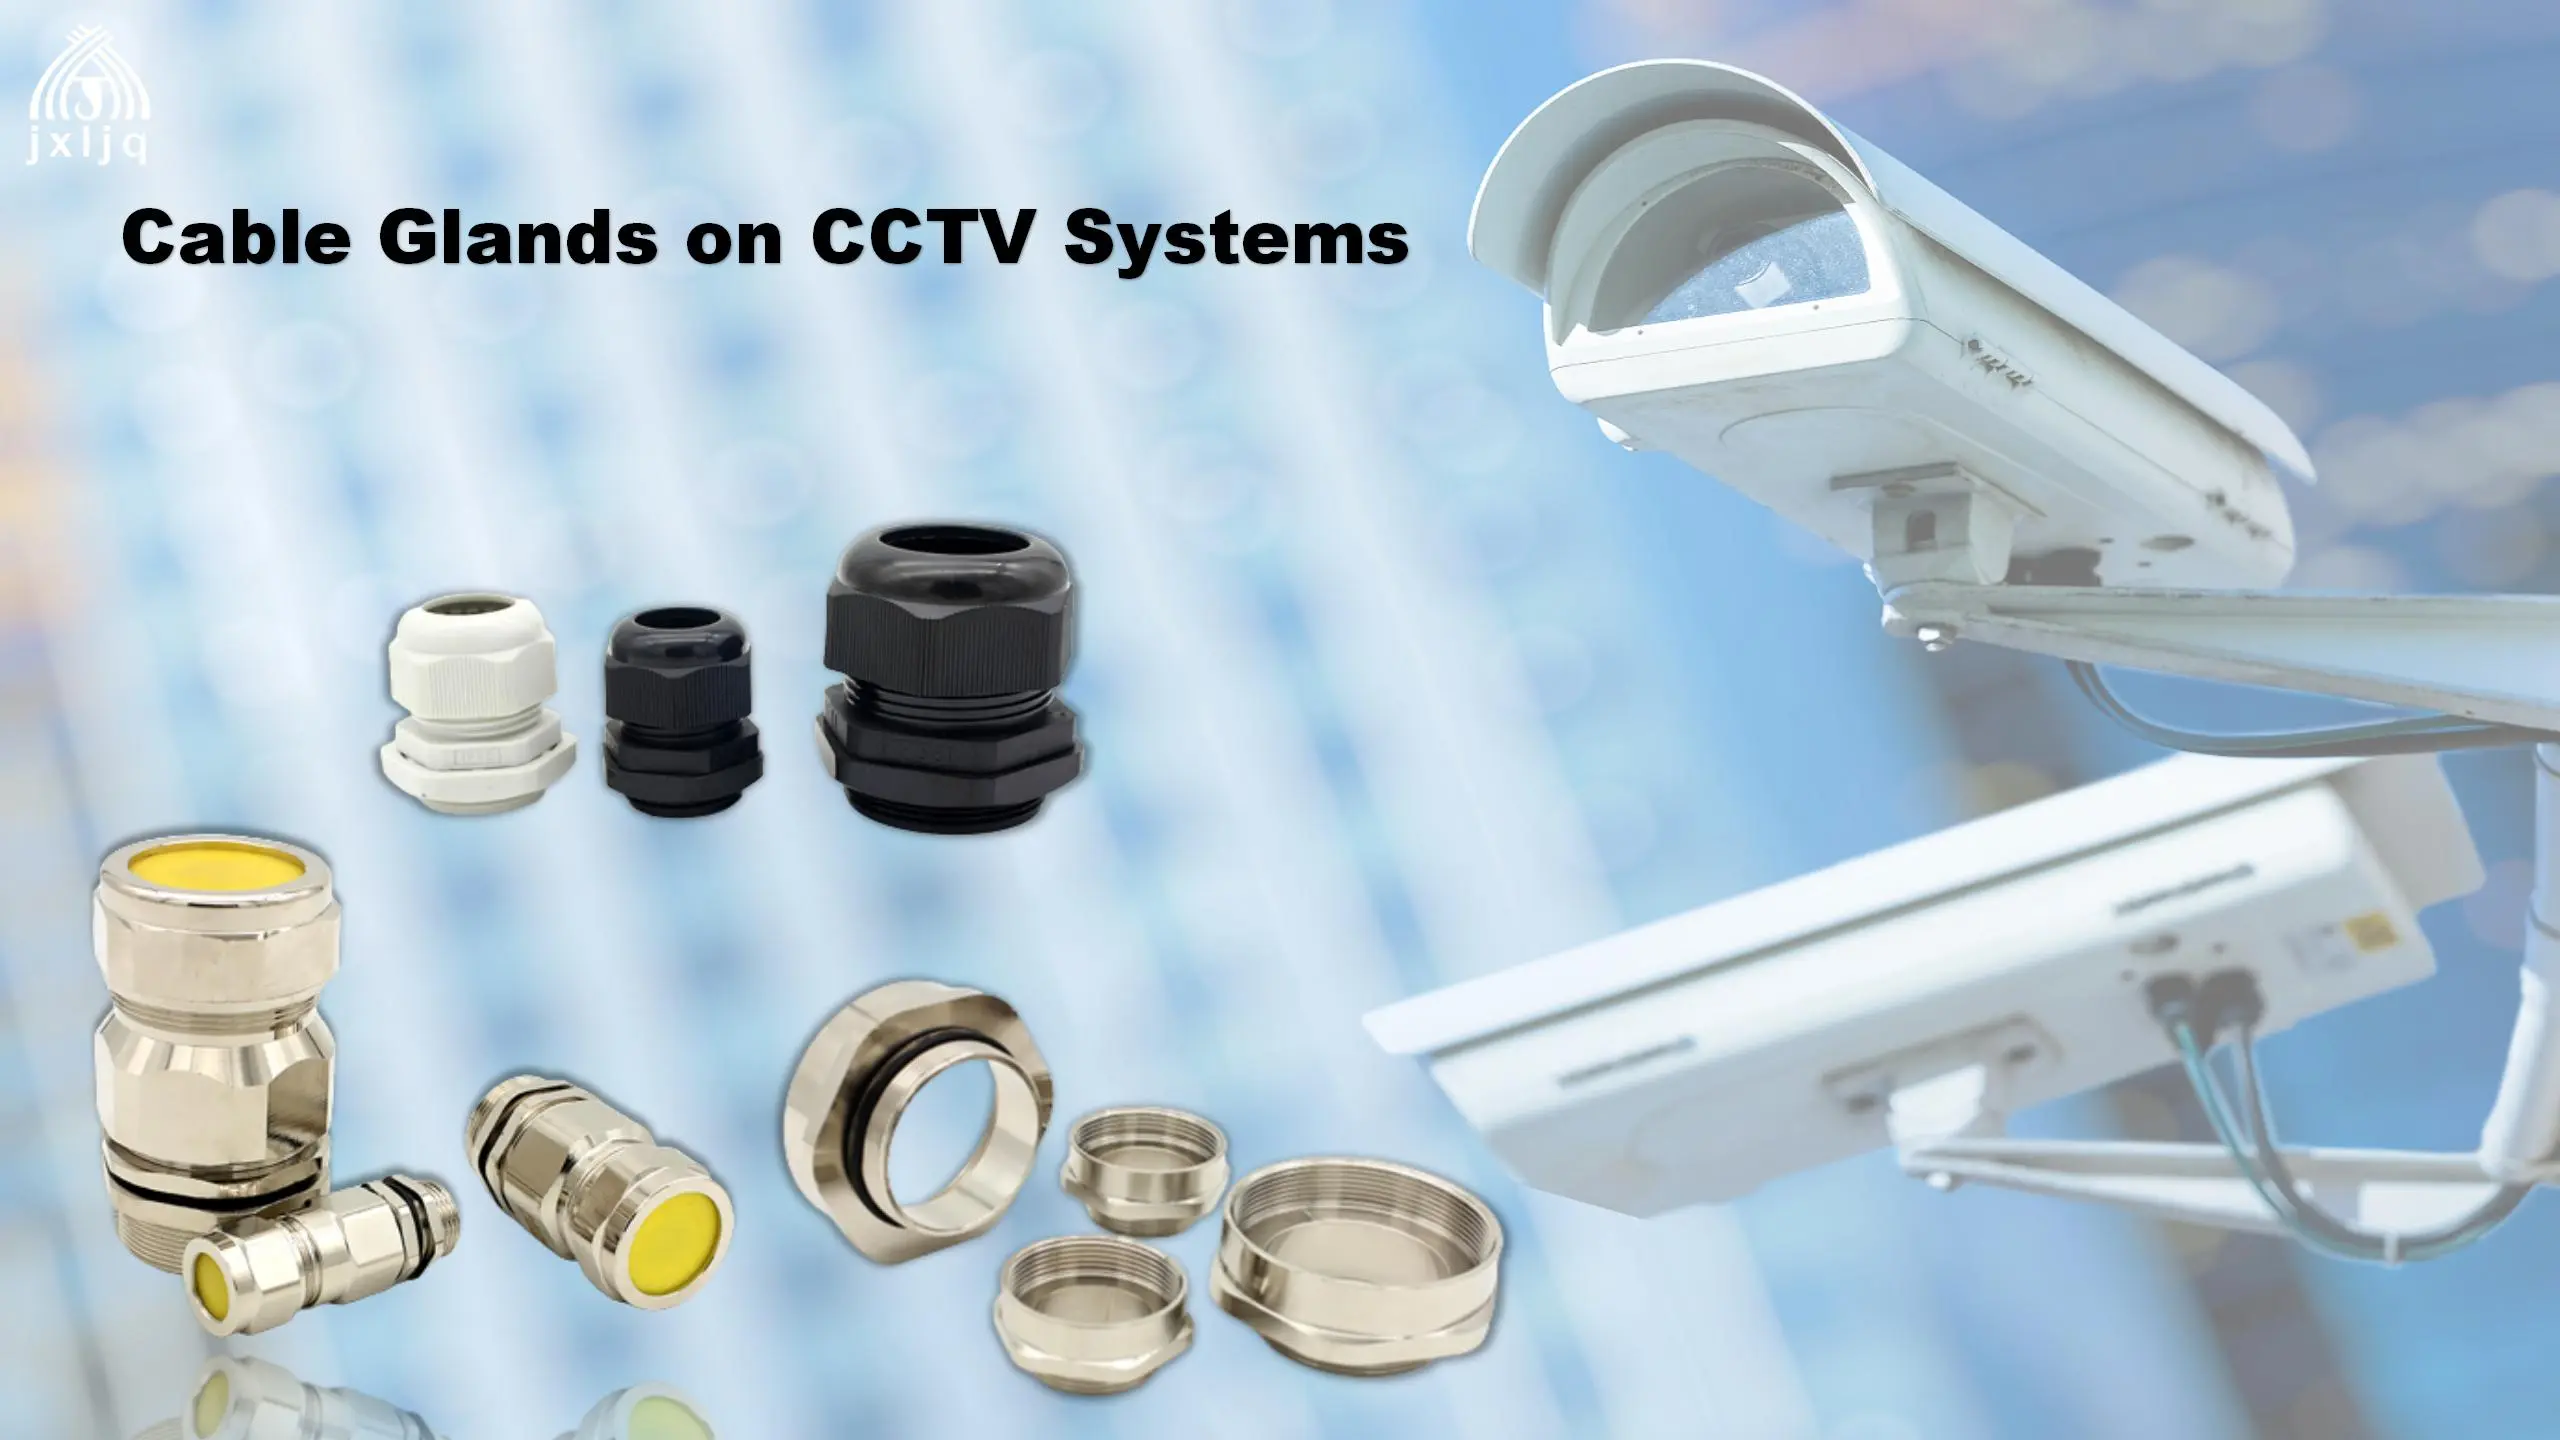 Application of the Cable Glands on CCTV Systems